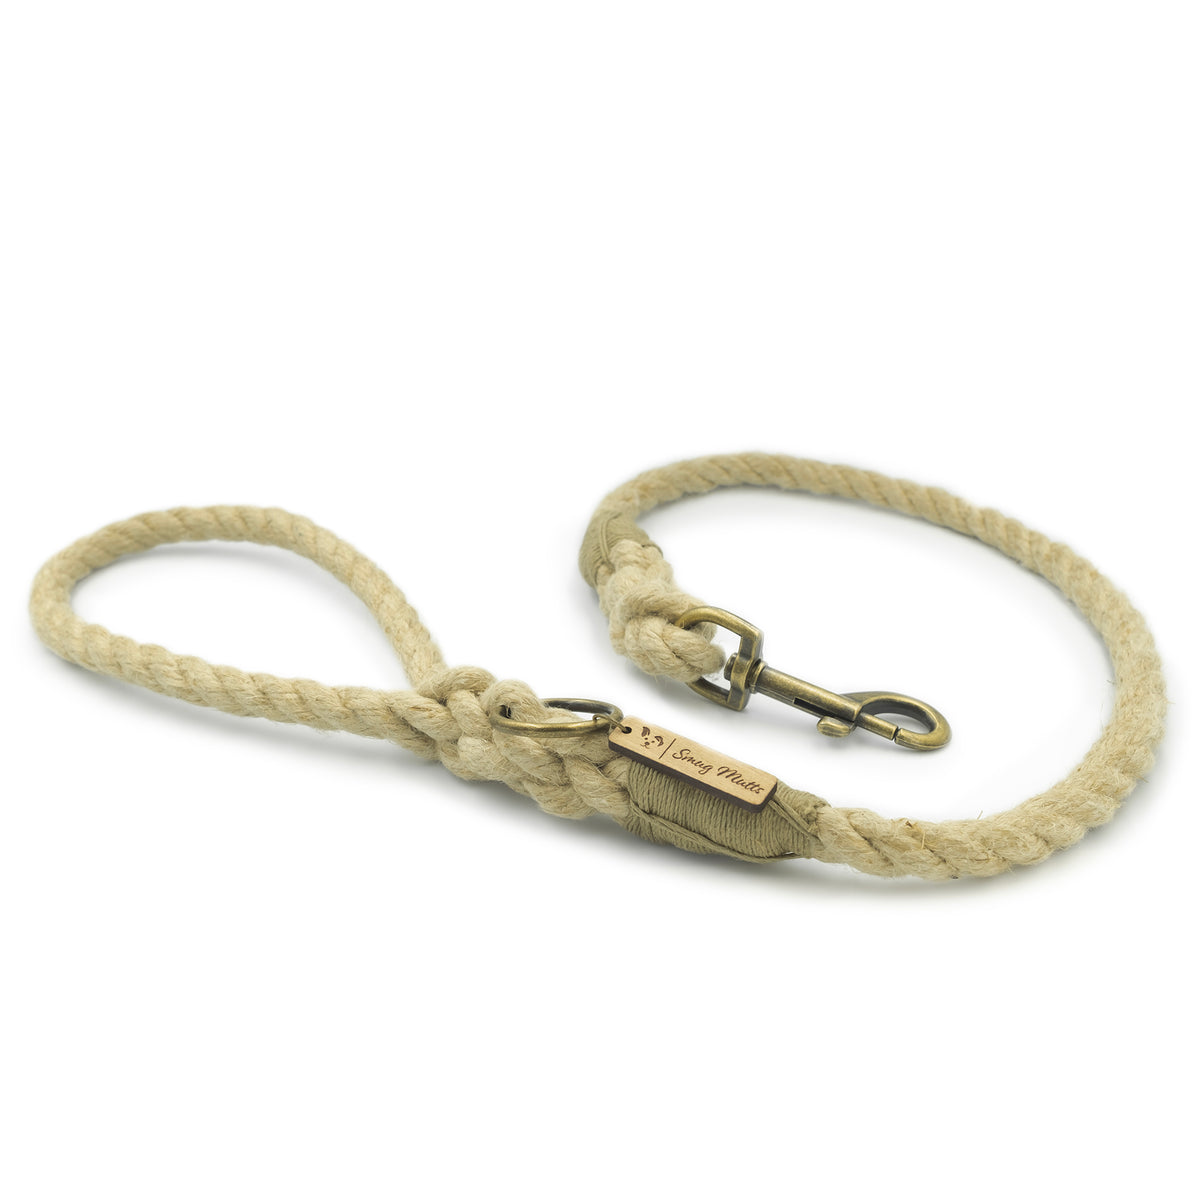 Smug Mutts Handmade, Organic, Natural Hemp Lead with Olive Green Whipping, Brass Spring Snap Clip and a Brass O-Ring, Natural and Eco Friendly Dog Lead